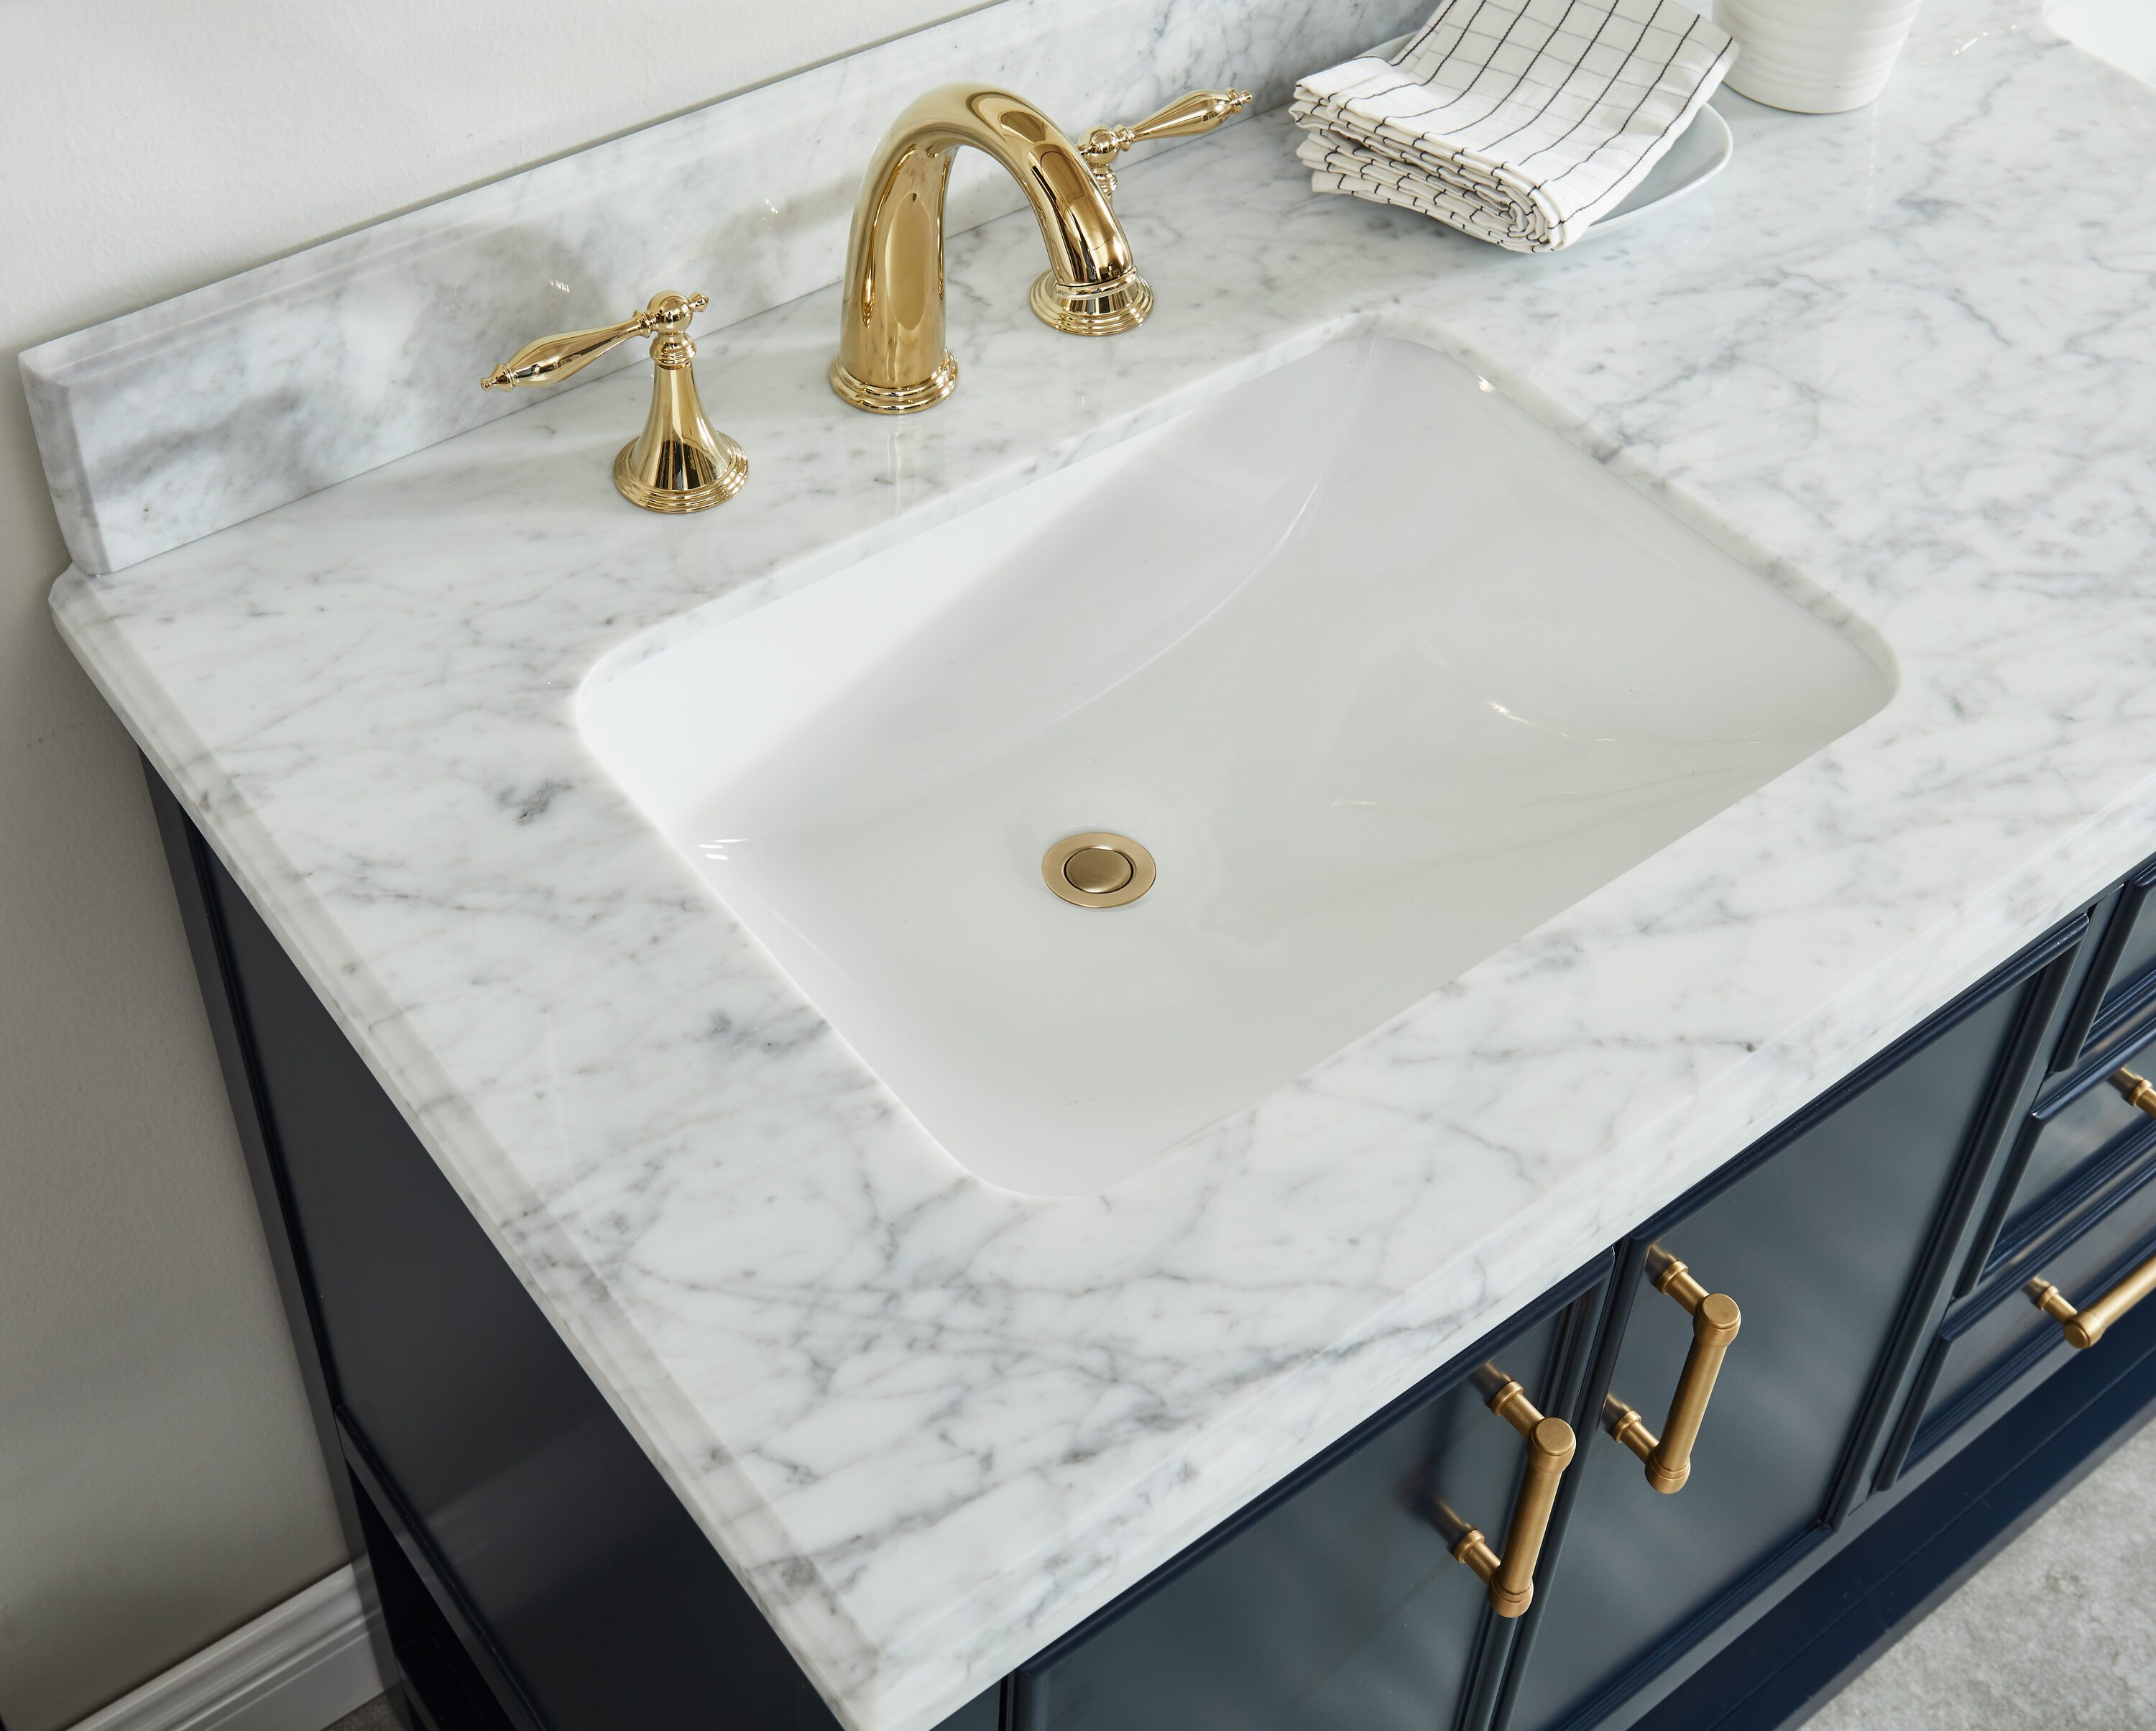 Allen + Roth Presnell 61-in Dove White Double Sink Bathroom Vanity with Carrara White Natural Marble Top | 261065